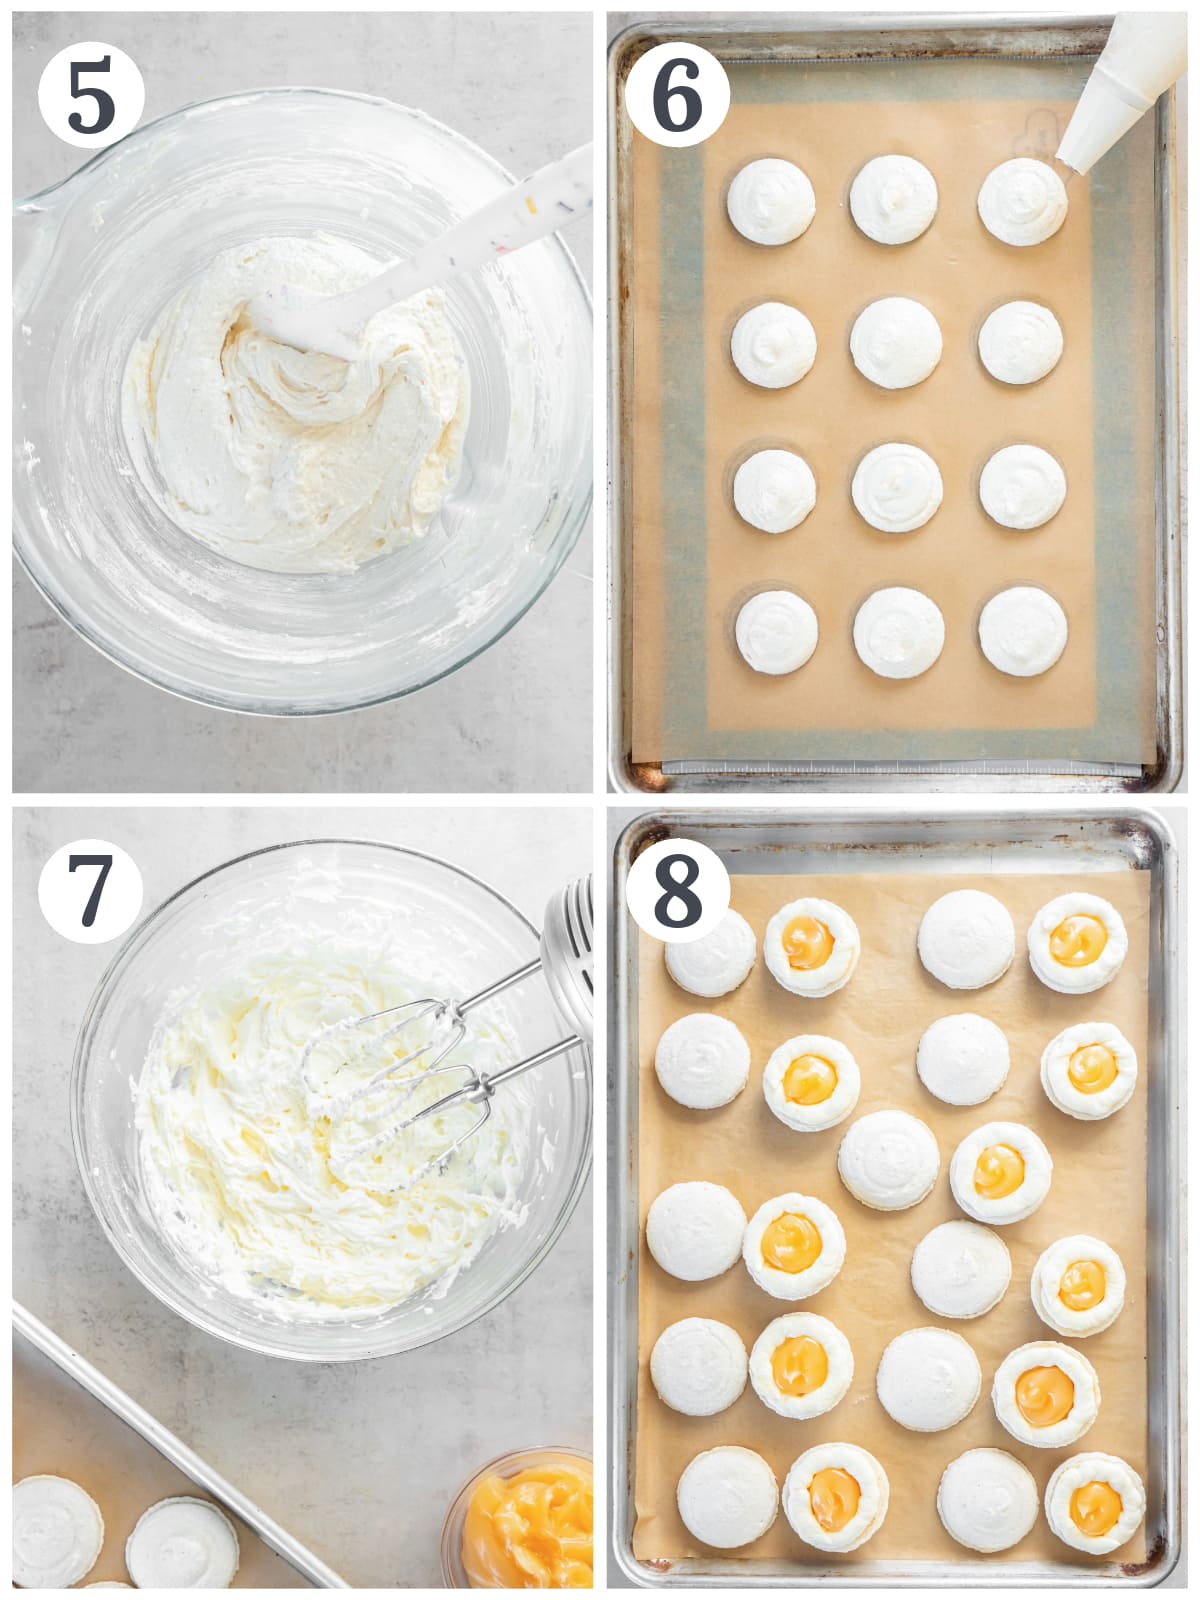 photo collage demonstrating how to pipe macarons on a baking sheet, and make lemon buttercream to fill macarons with.